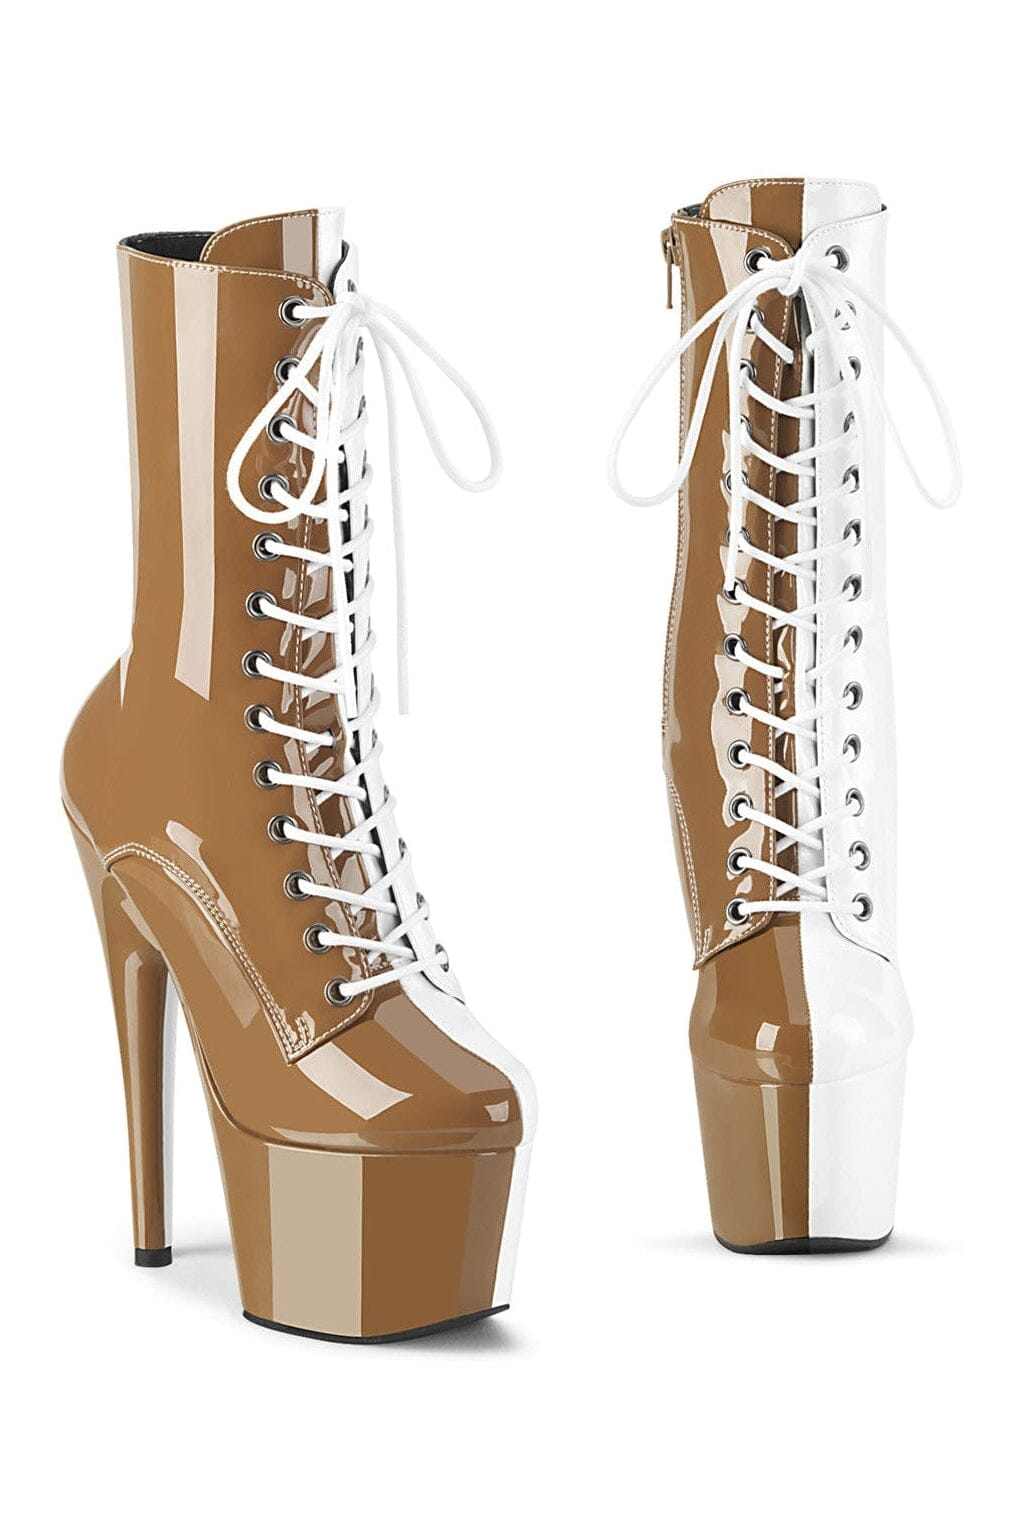 Pleaser Grey Ankle Boots Platform Stripper Shoes | Buy at Sexyshoes.com